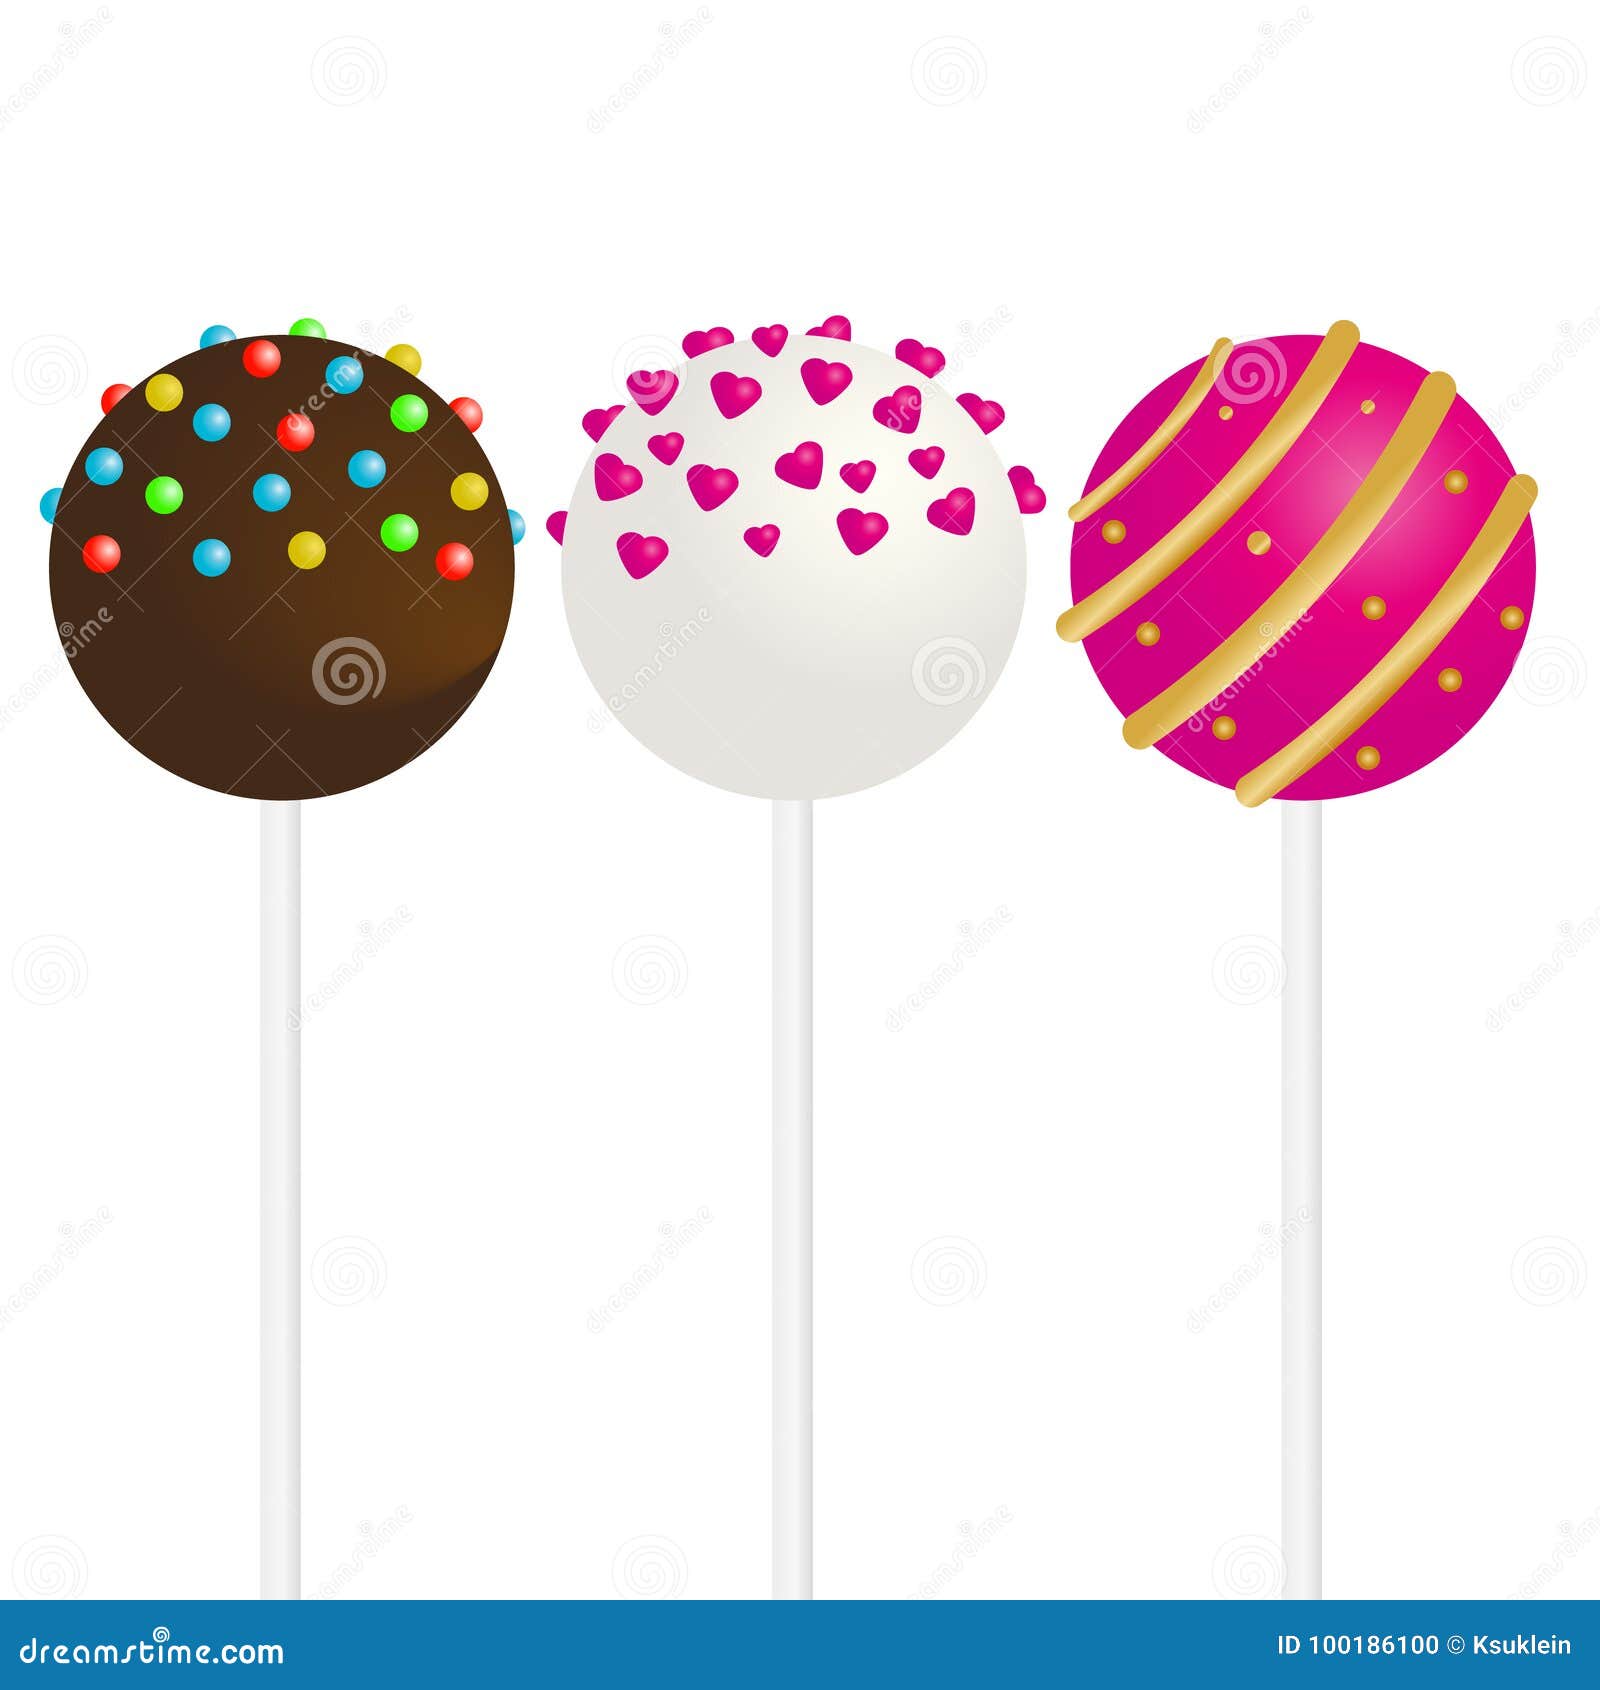 cake pops with sprinkles.   in realistic style